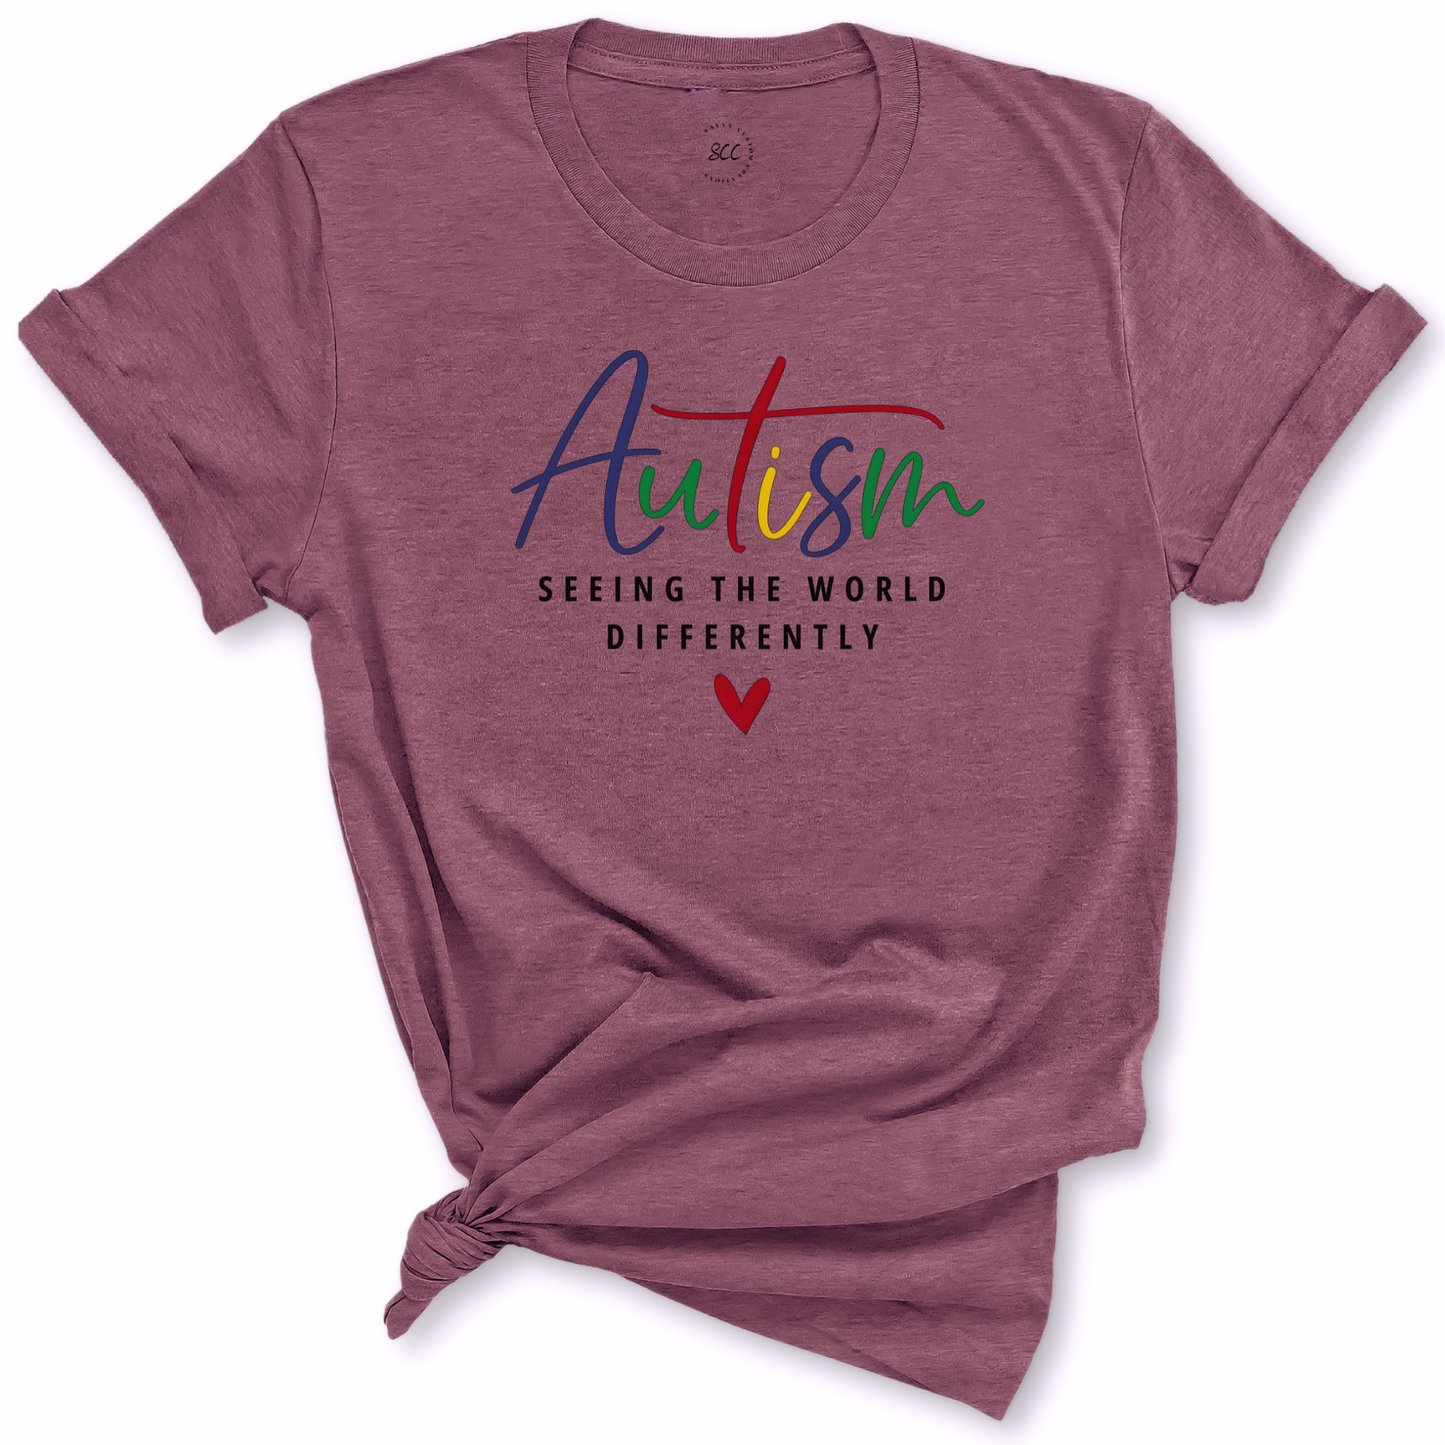 AUTISM, SEEING THE WORLD DIFFERENTLY - Unisex Crewneck T-Shirt